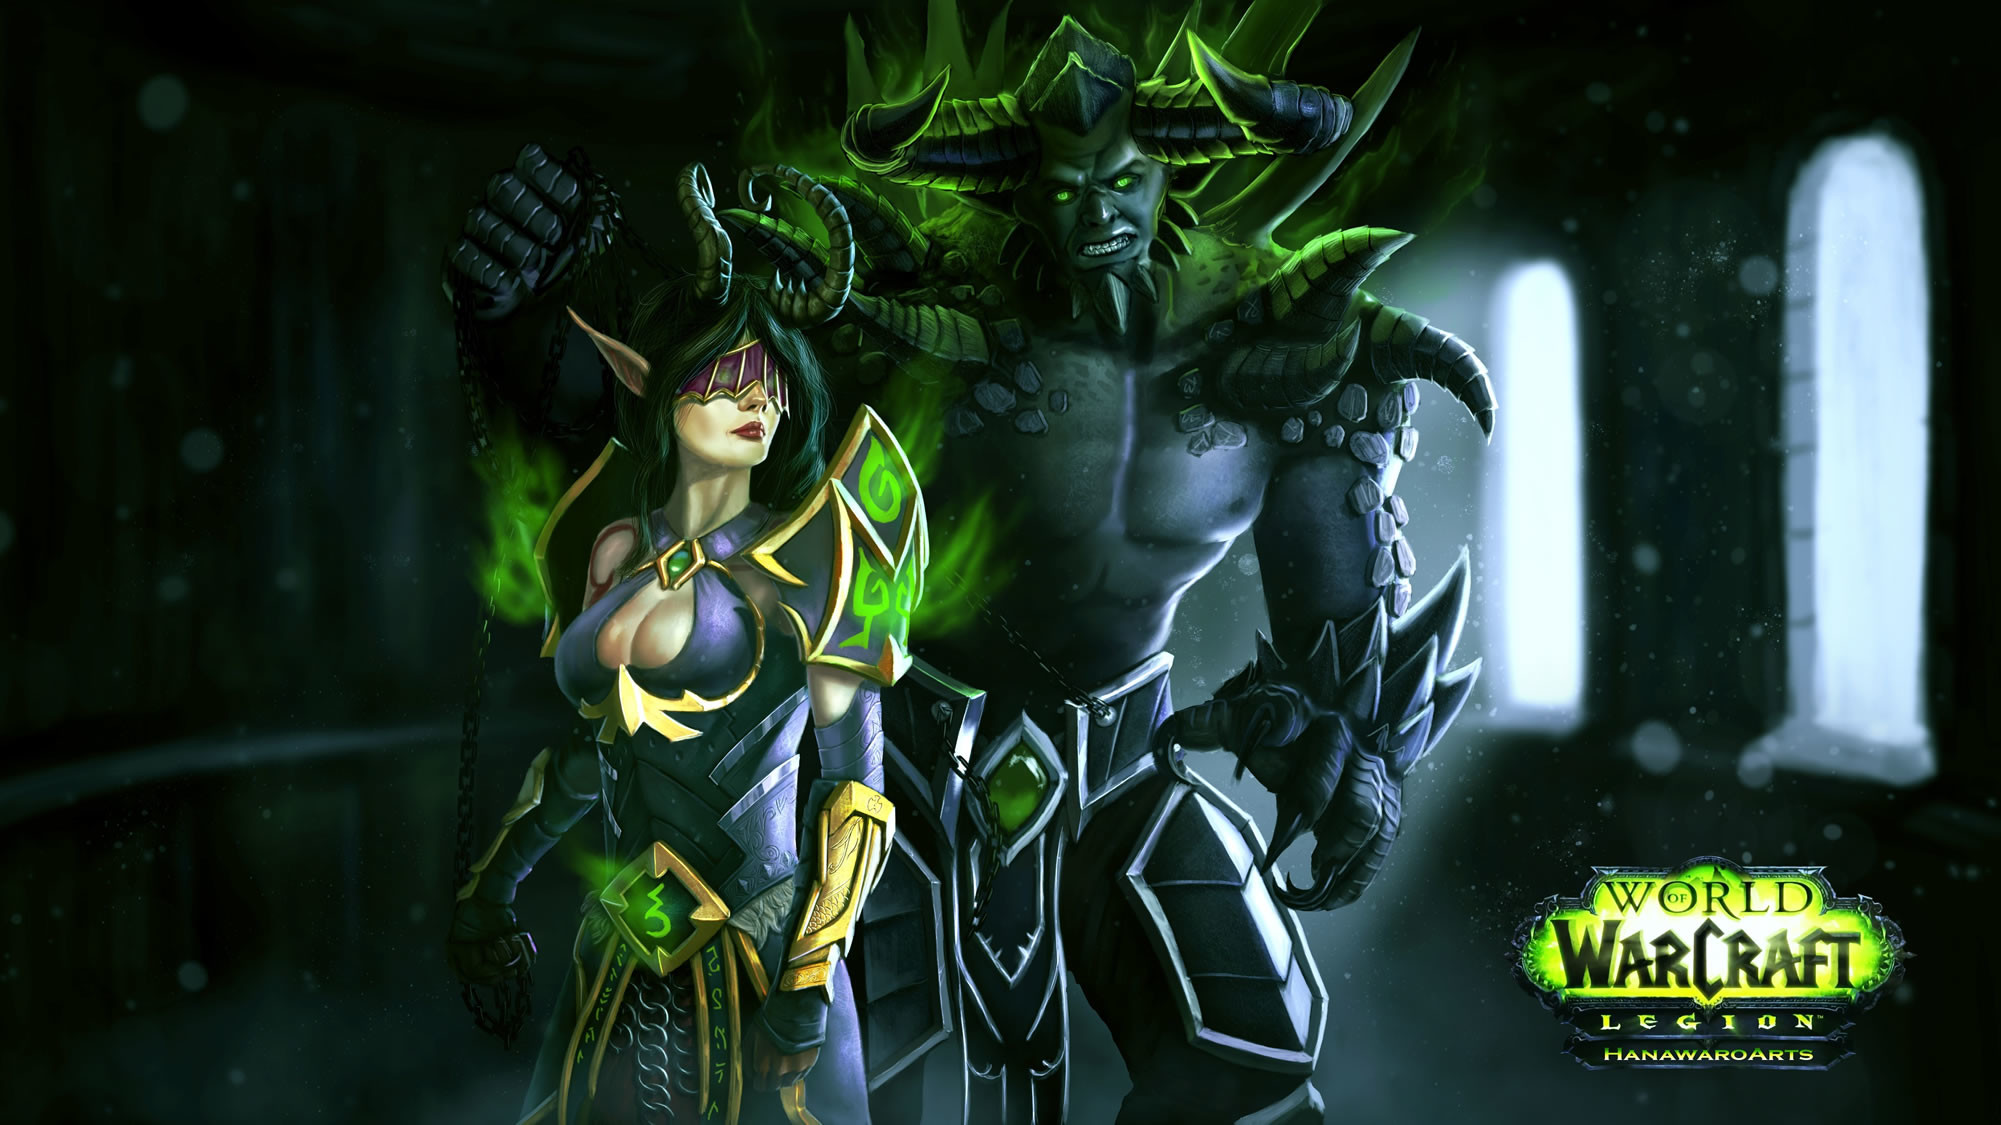 2001x1125 Full HD p World of warcraft Wallpapers HD, Desktop Backgrounds World of  Warcraft Legion Wallpapers Wallpapers)